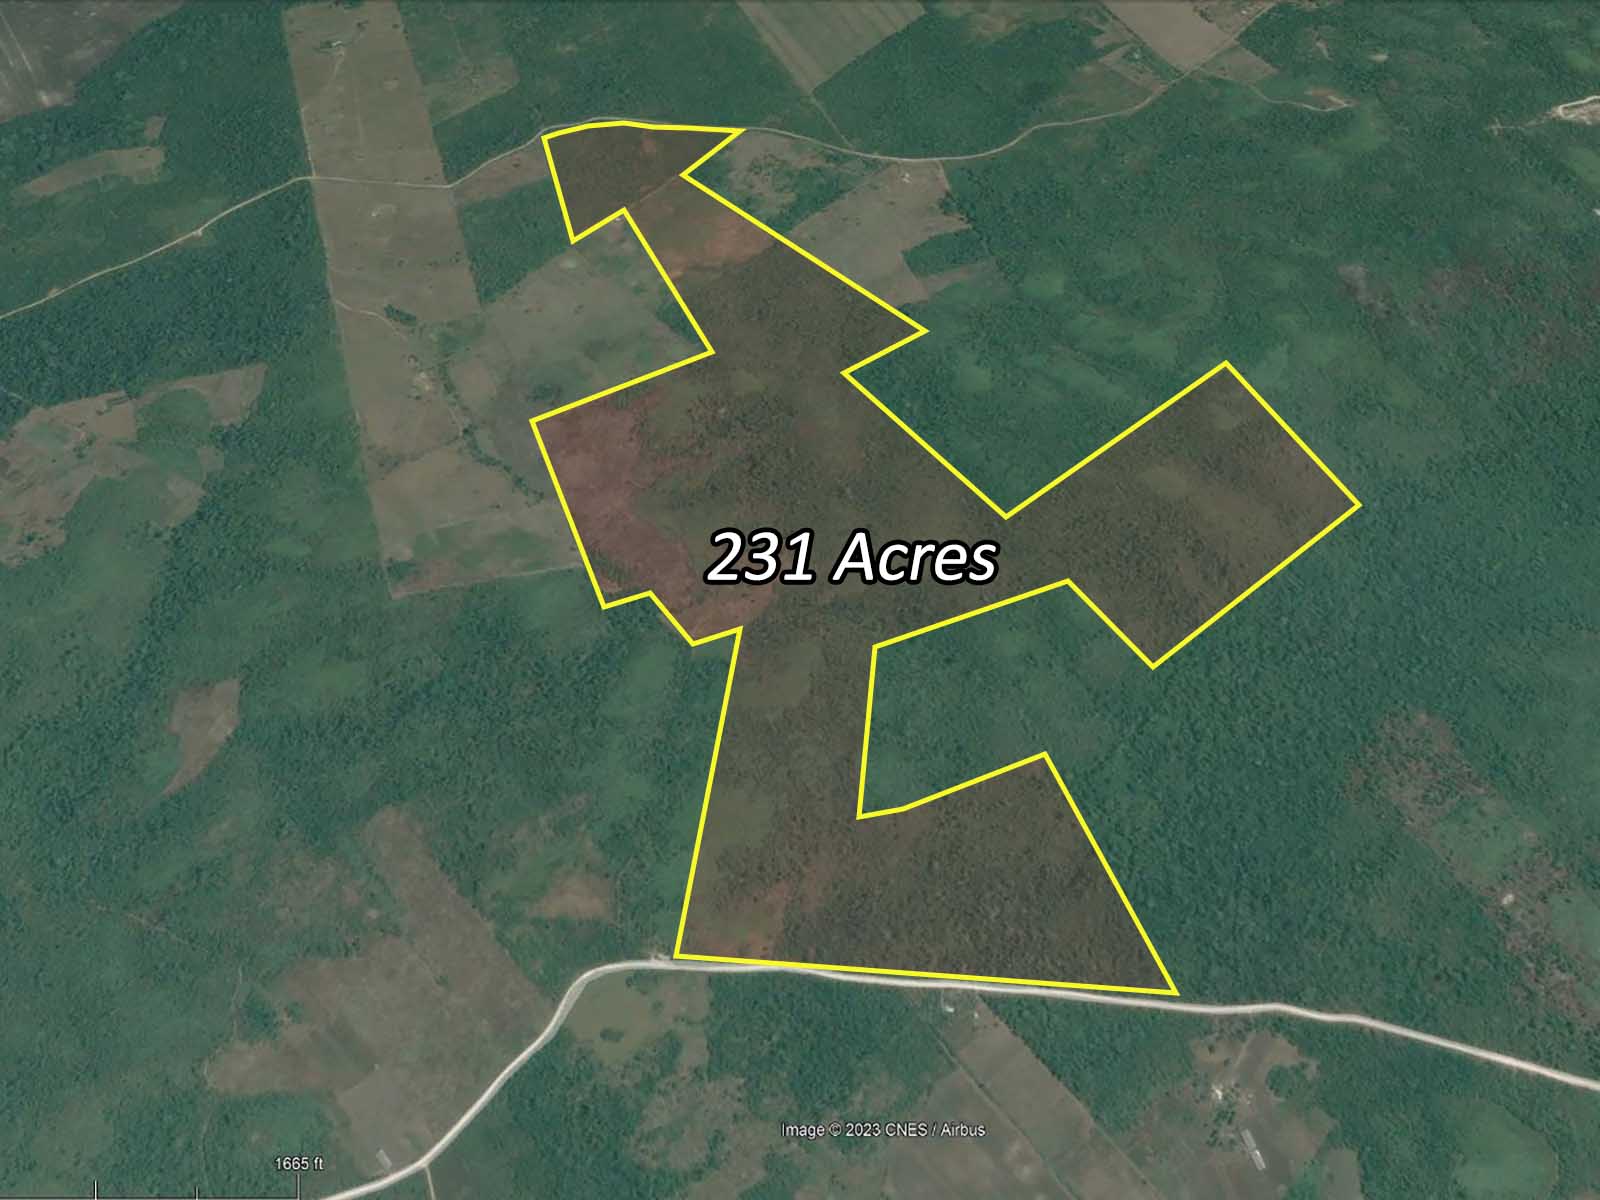 231 Acre Farm Land in Young Gial Area for sale in Belize